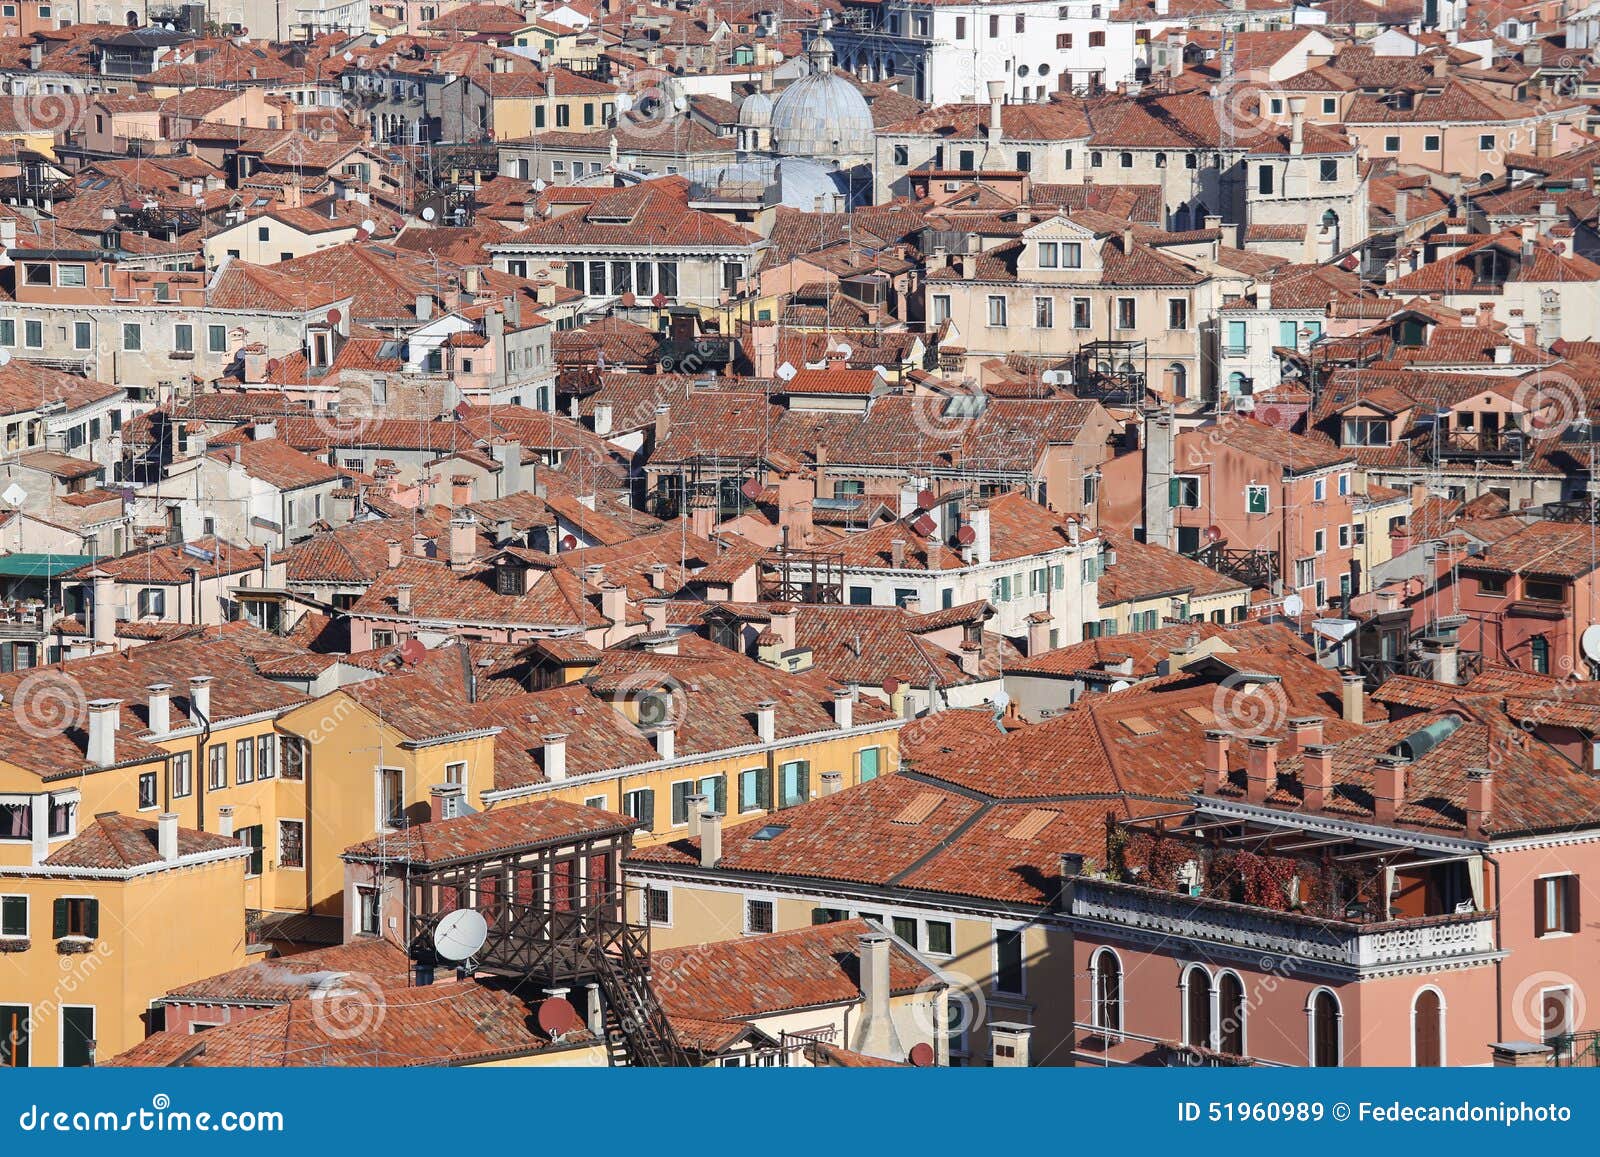 venice, italy, red-tile roofs and many houses